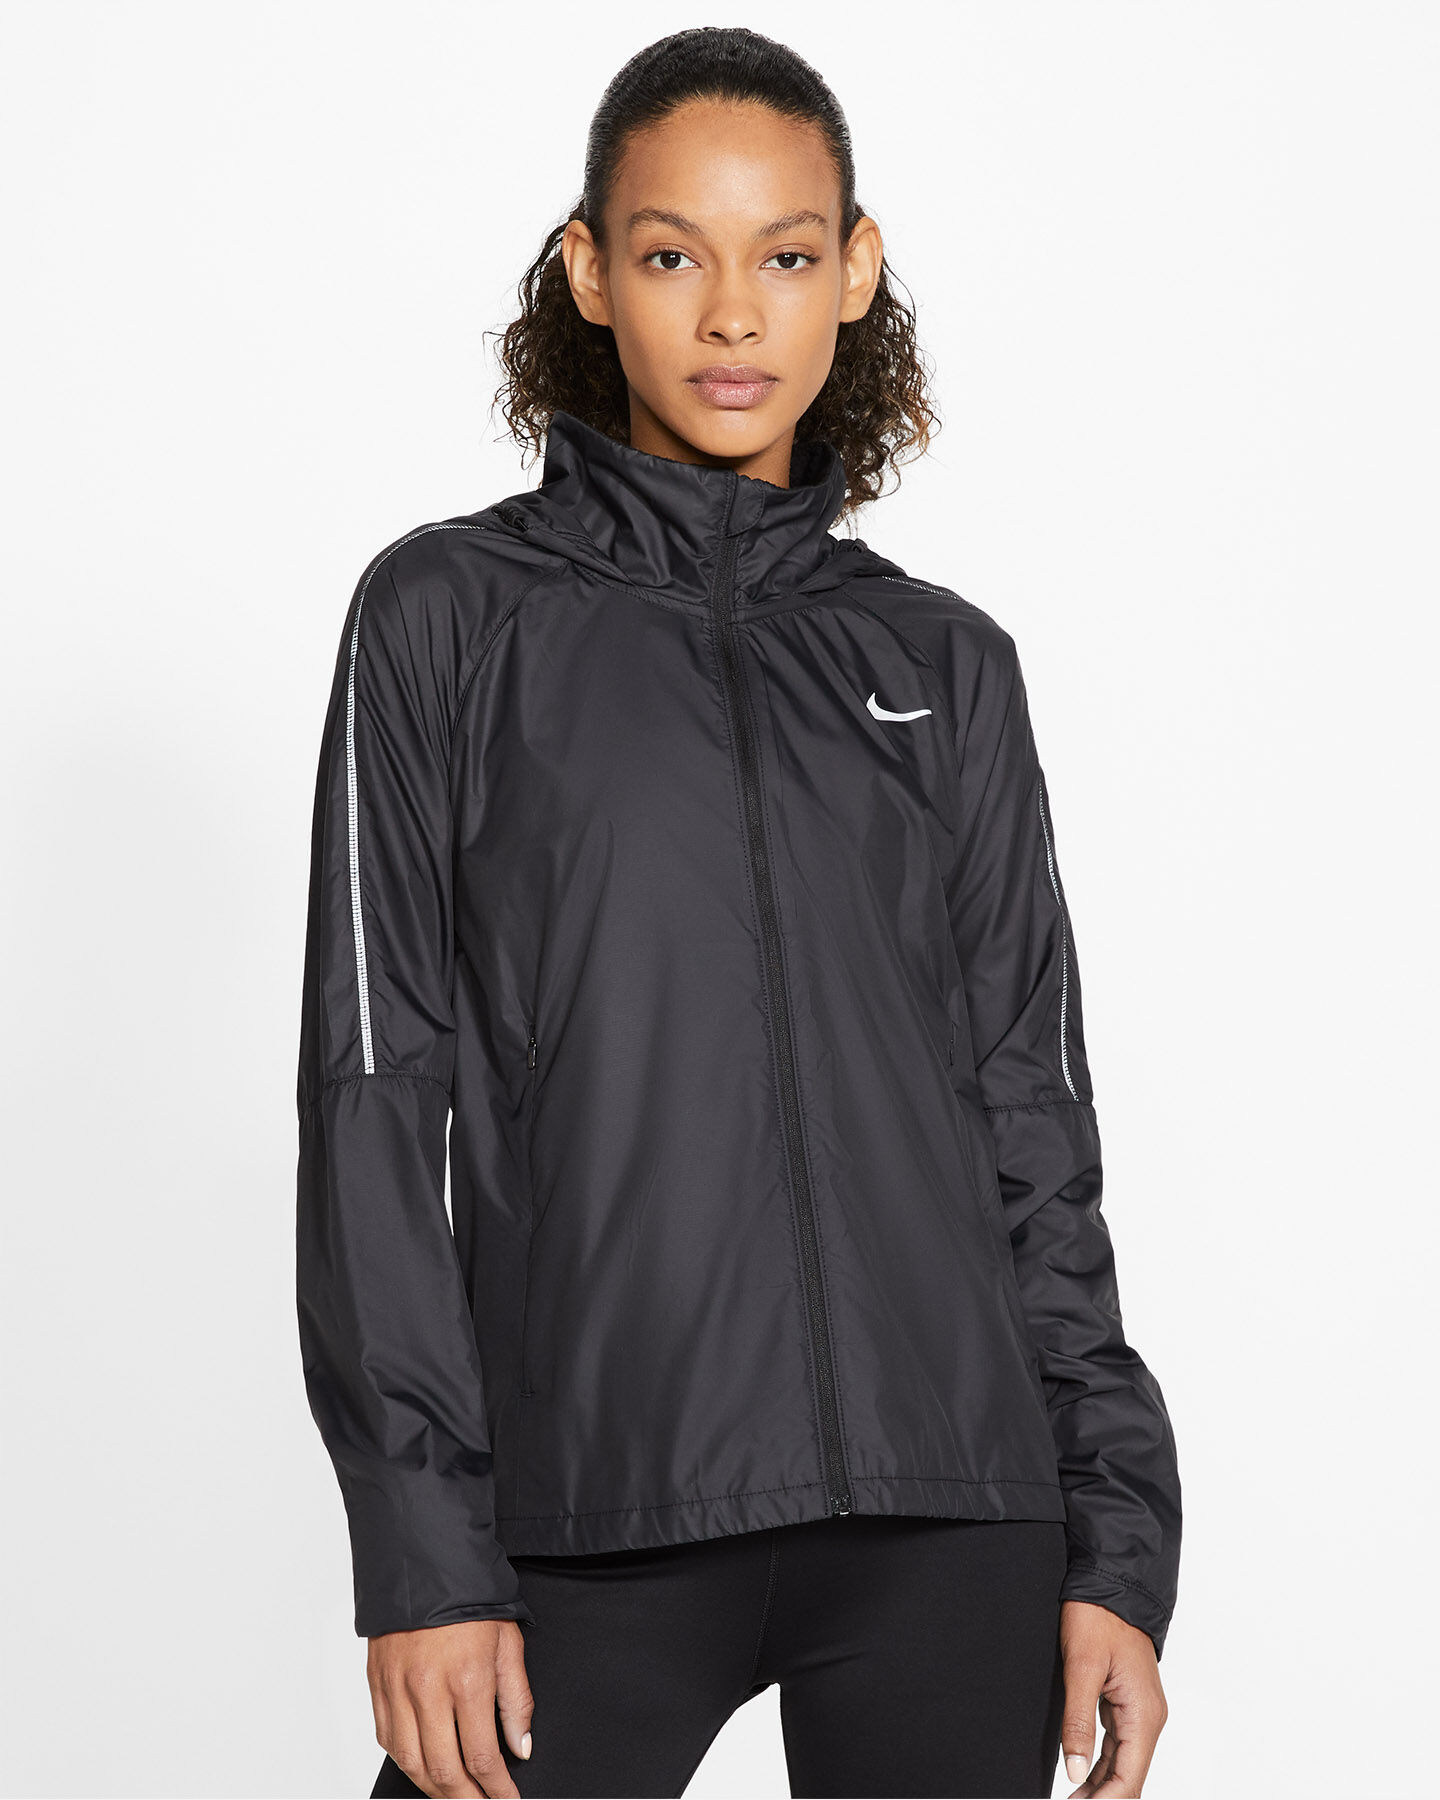  Giacca running NIKE SHIELD W S5249054|010|XS scatto 2